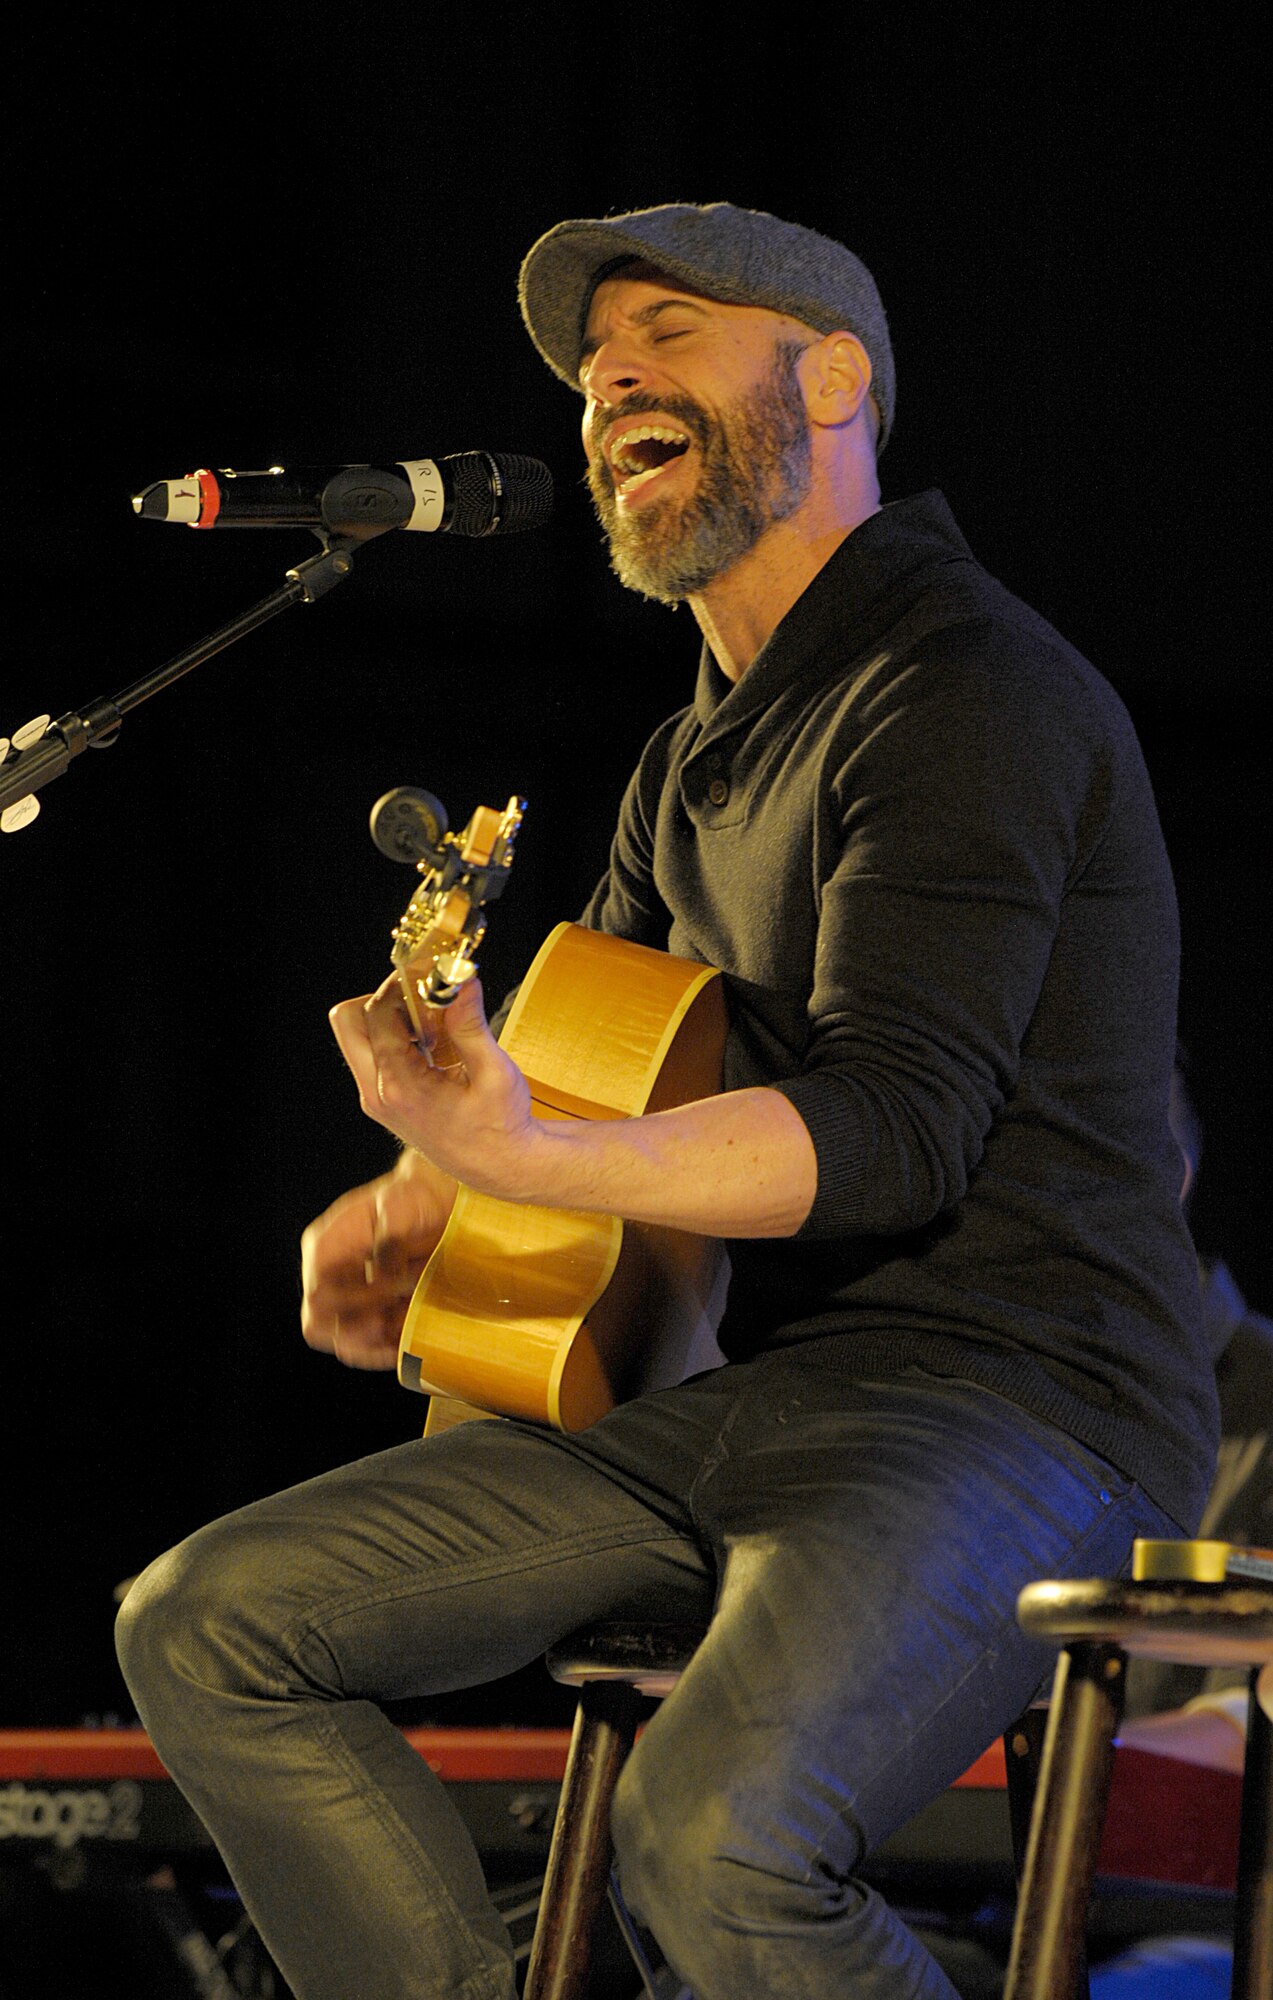 Musician Chris Daughtry performs during the 2015 USO Holiday Troop Tour Dec. 9, 2015, at Ramstein Air Base, Germany. Daughtry and other celebrities joined U.S. Marine Corps Gen. Joseph F. Dunford, chairman of the Joint Chiefs of Staff, for the 15th annual tour to thank service members and their families for their service and sacrifices. (U.S. Air Force photo/Staff Sgt. Timothy Moore)